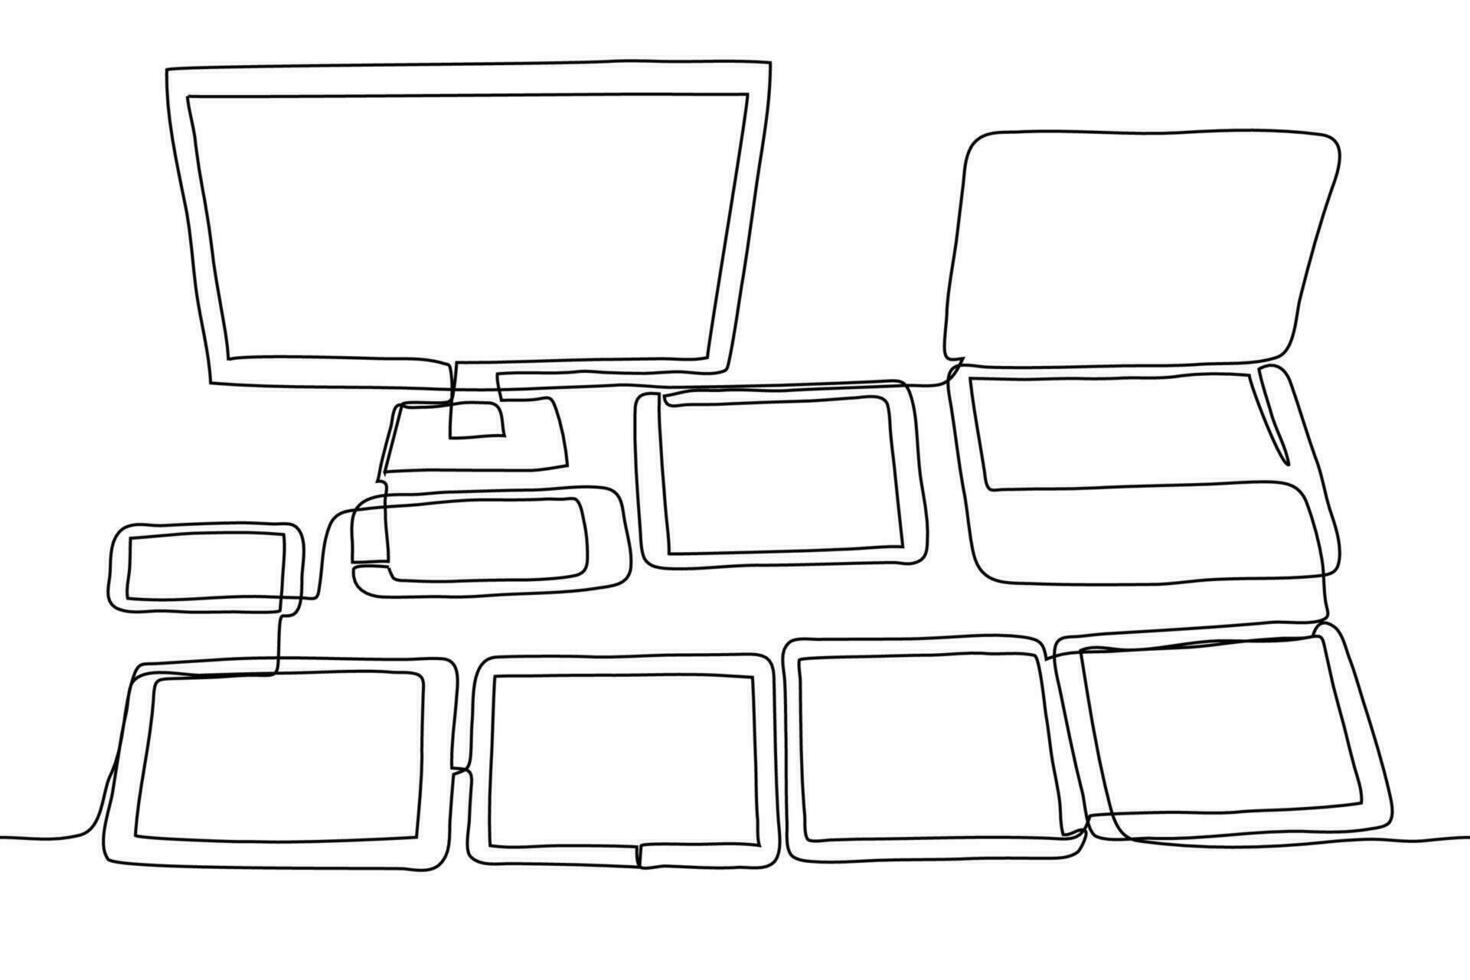 gadgets laid out on the table a computer, laptop, telephone, console, telephone and several tablets. One continuous line drawing the concept of online streaming, family gadgets vector